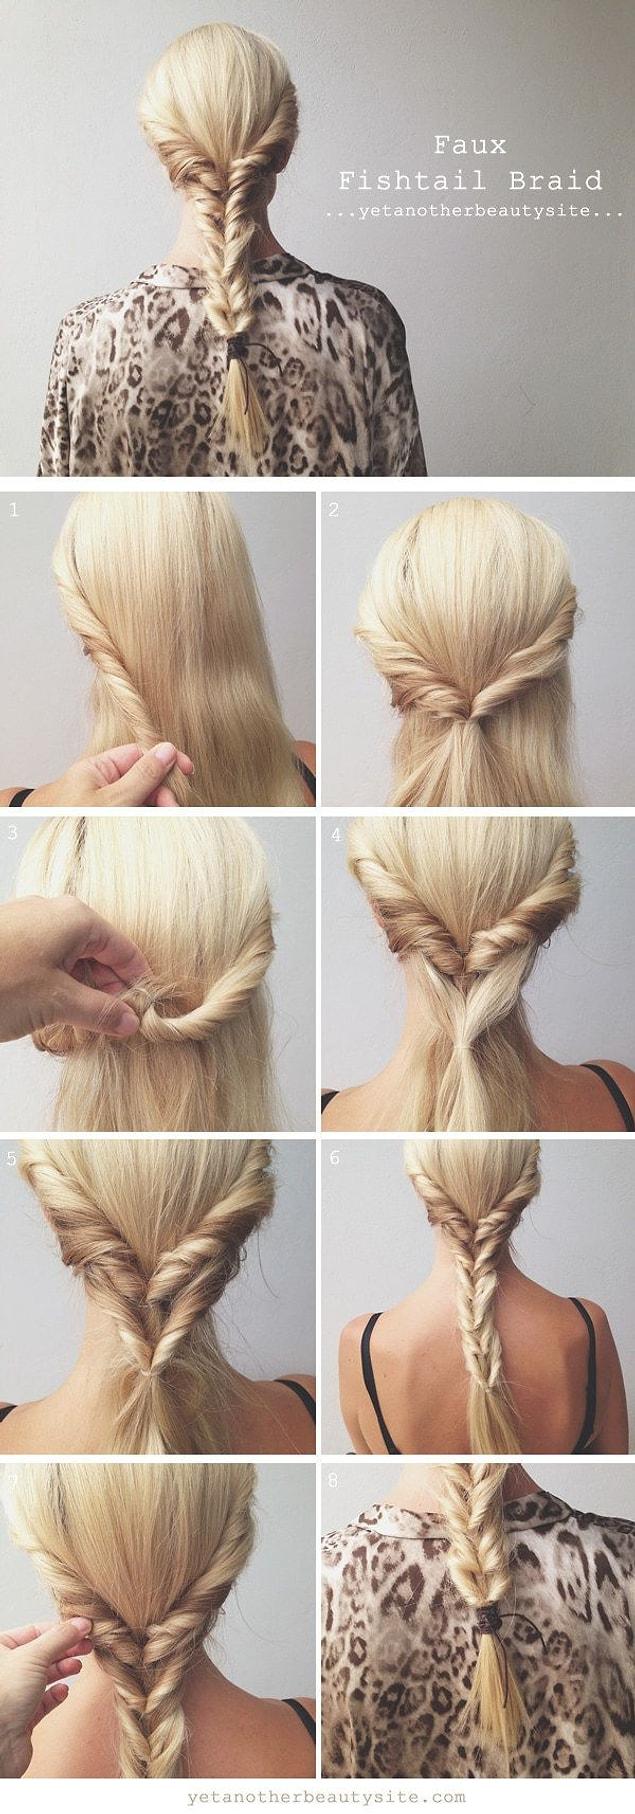 9. For those who can't bother with fishtail braids...